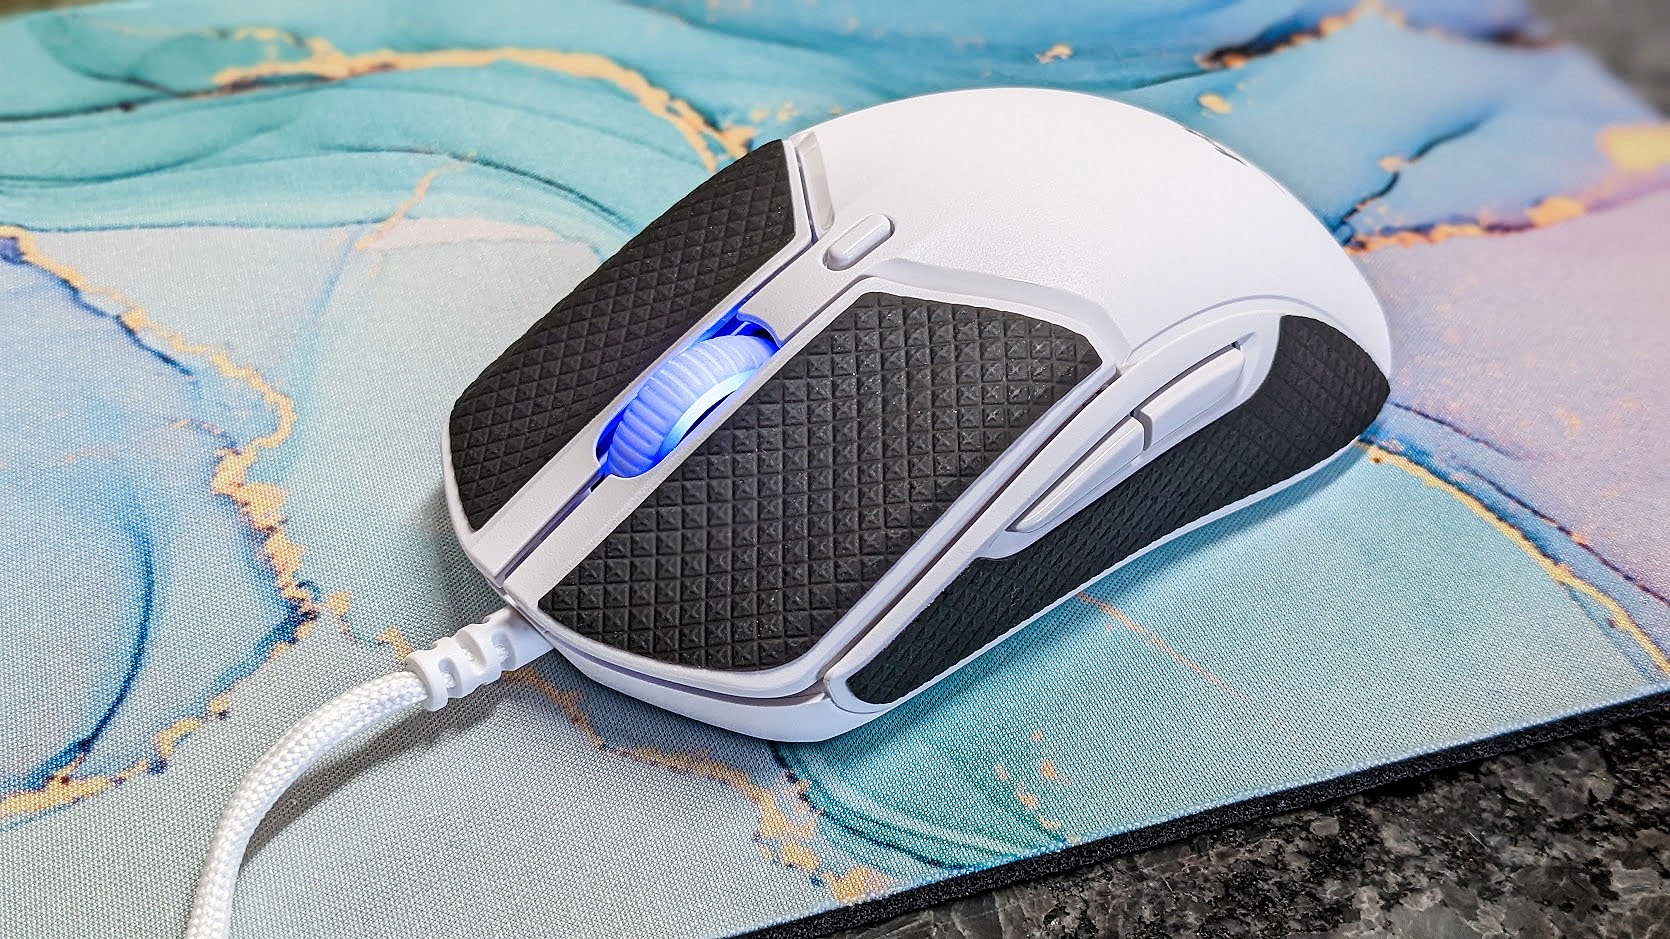 HyperX Pulsefire Haste 2 gaming mouse with grip adhesives